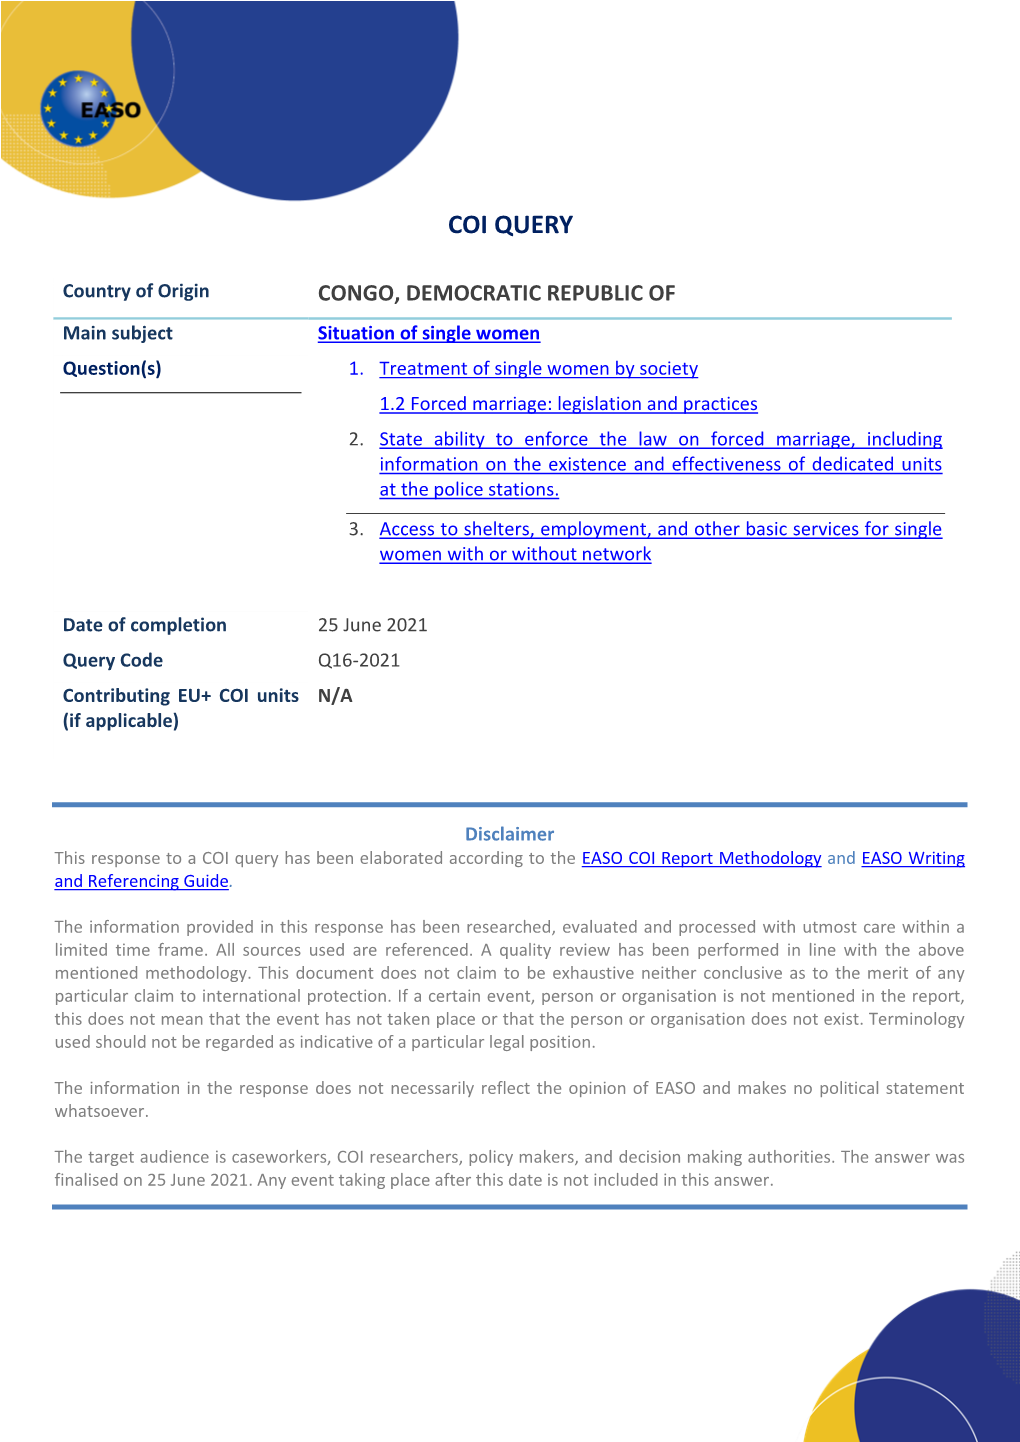 EASO COI Query Response Published on 7 November 2019